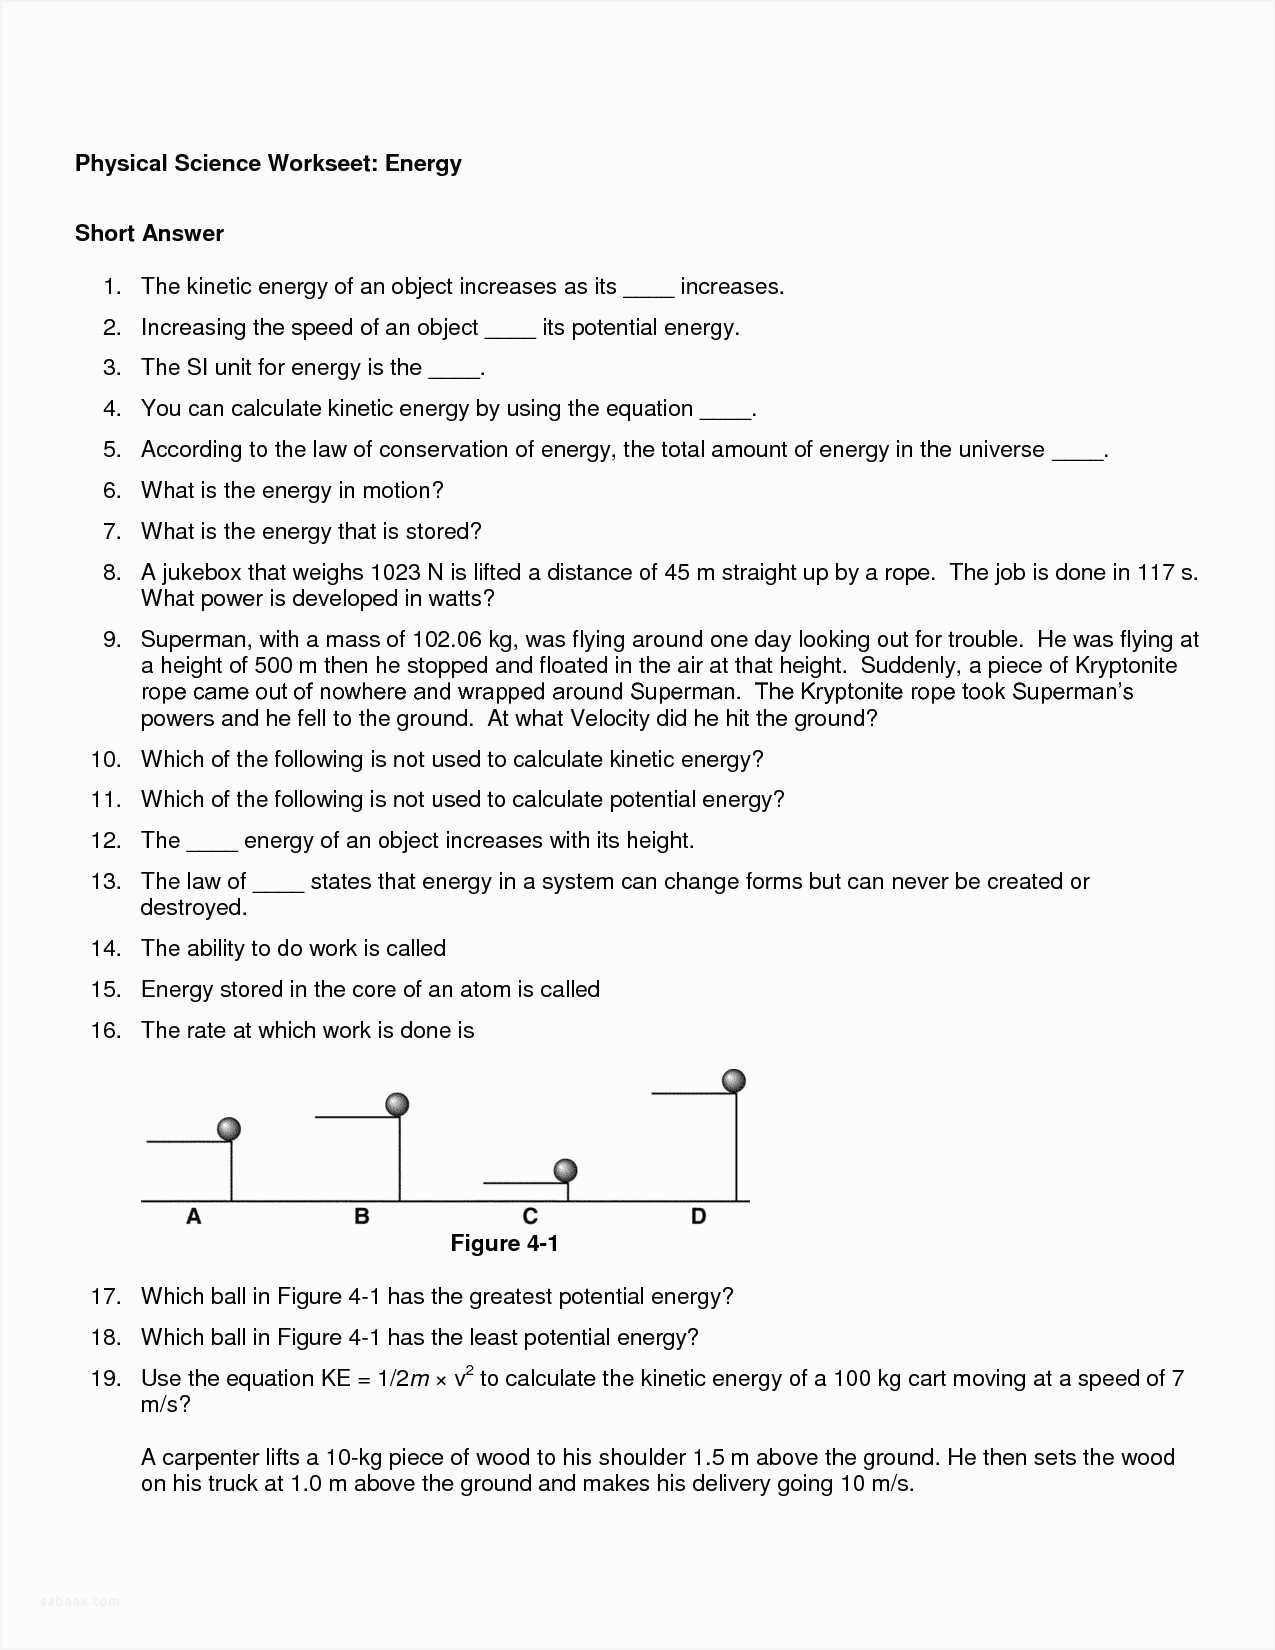 Potential and Kinetic Energy Roller Coaster Worksheet with Smart Potential Vs Kinetic Energy Worksheet Answers – Sabaax